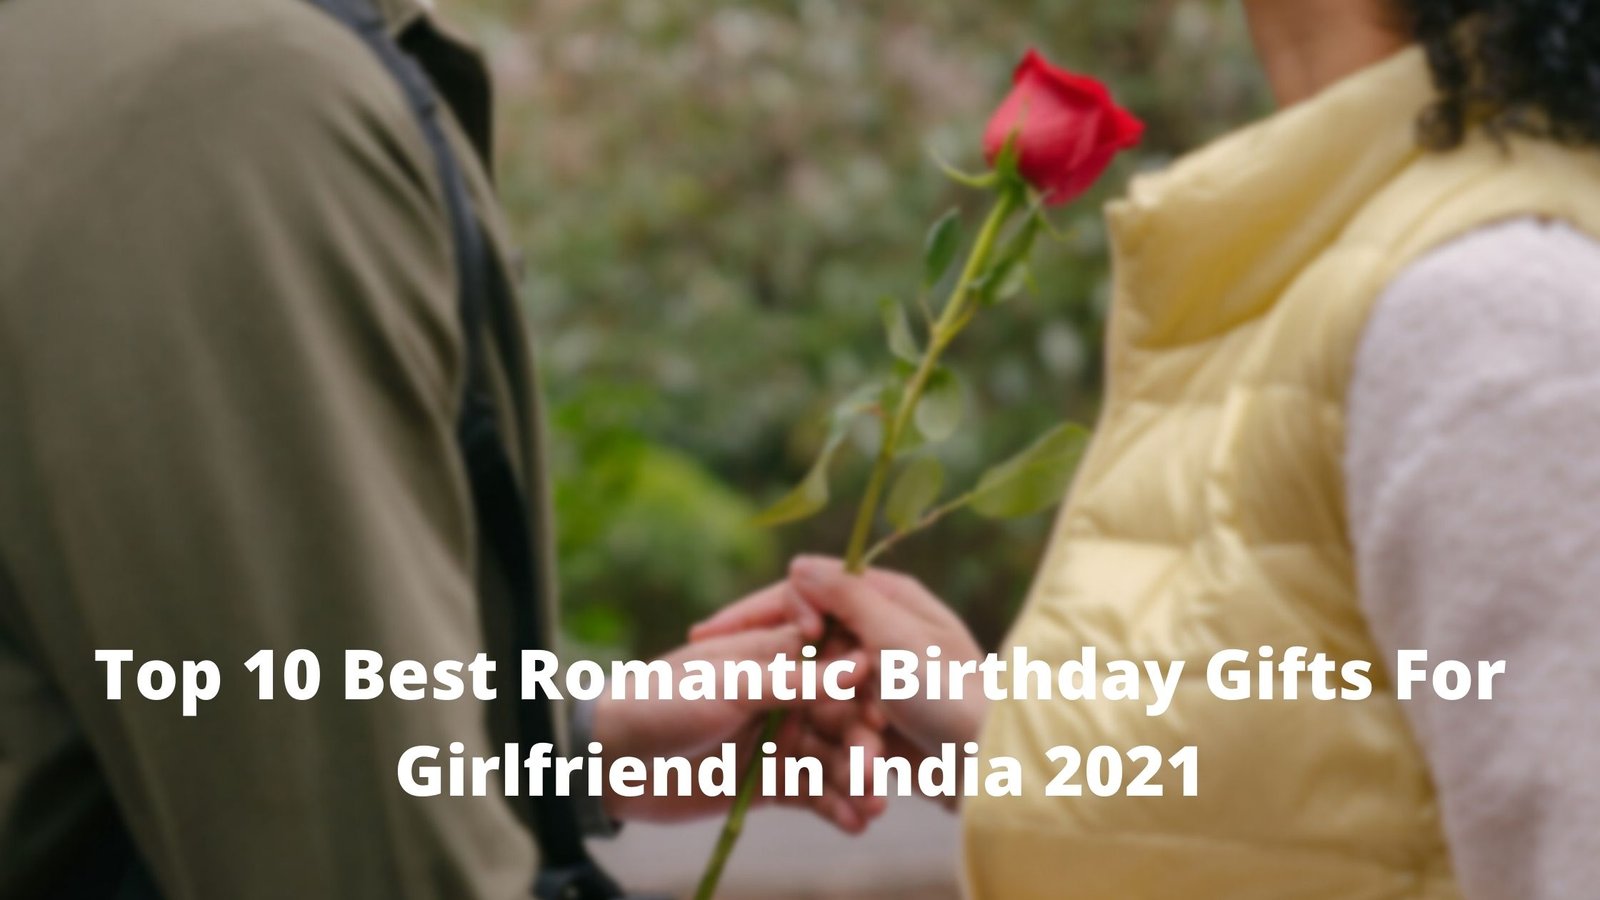 Top 10 Best Romantic Birthday Gifts For Girlfriend in India